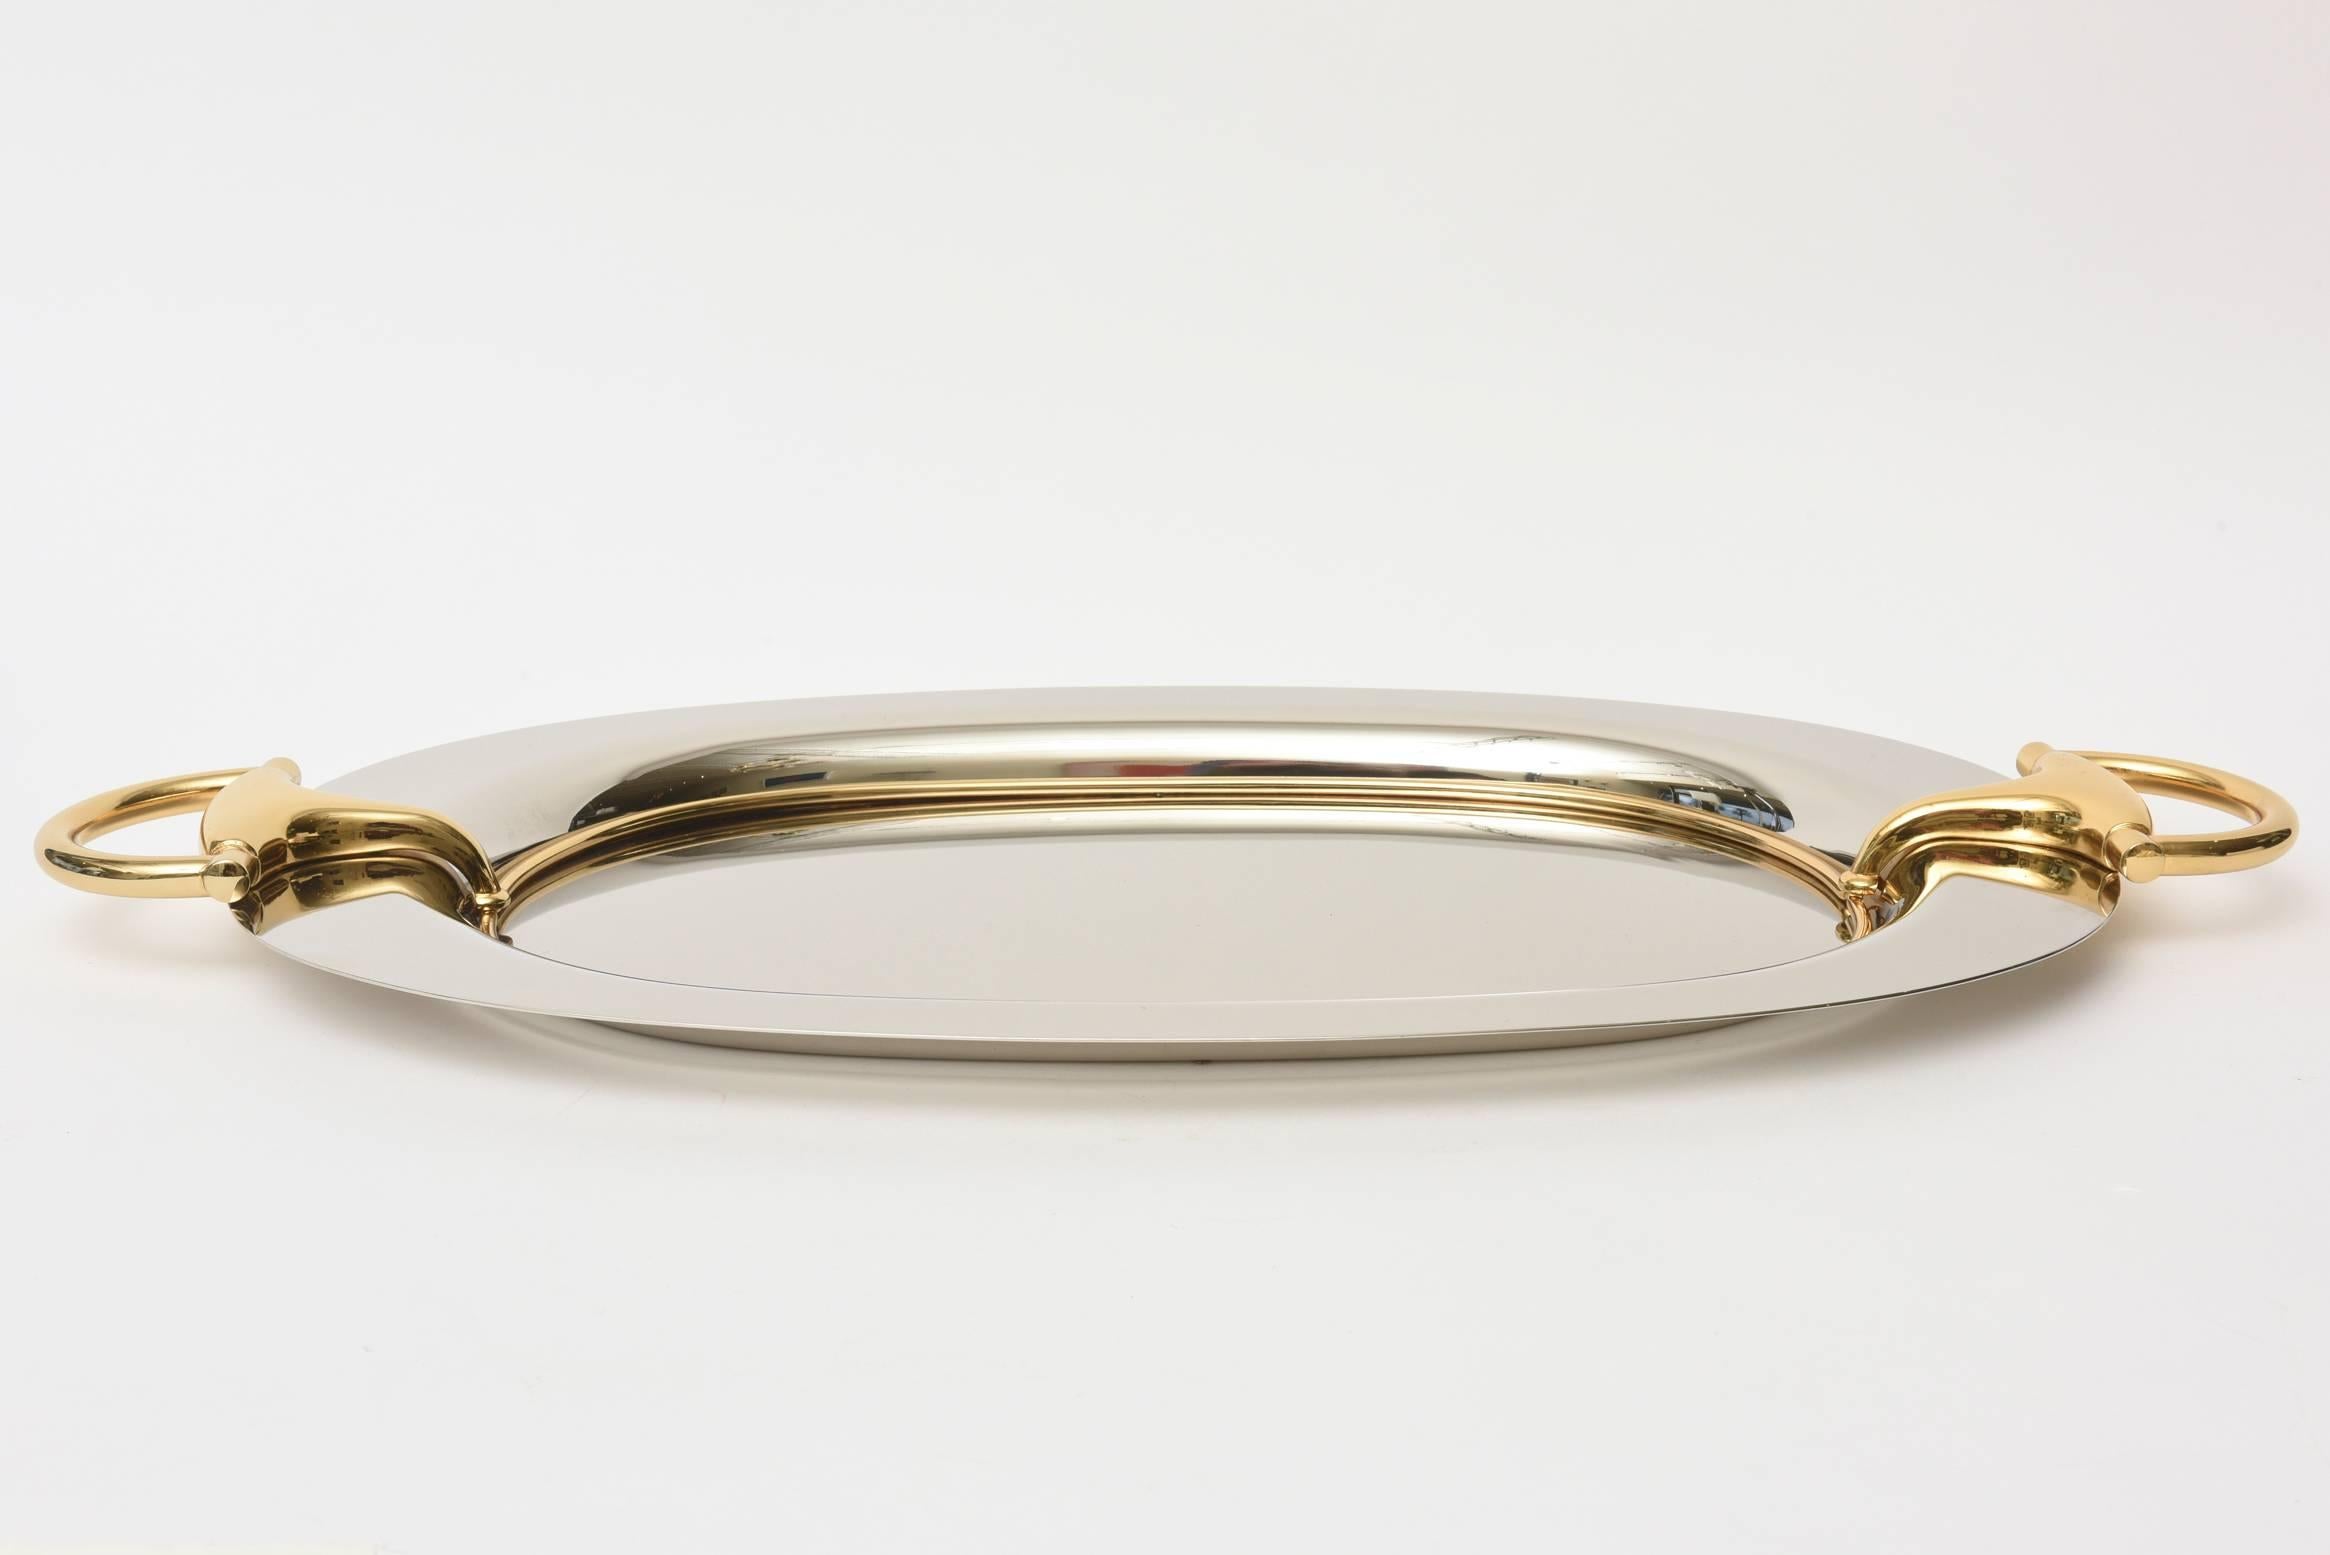 Modern Gucci Rare Vintage Silver Plate, Brass Horse Bit Oval Tray with Handles Barware For Sale